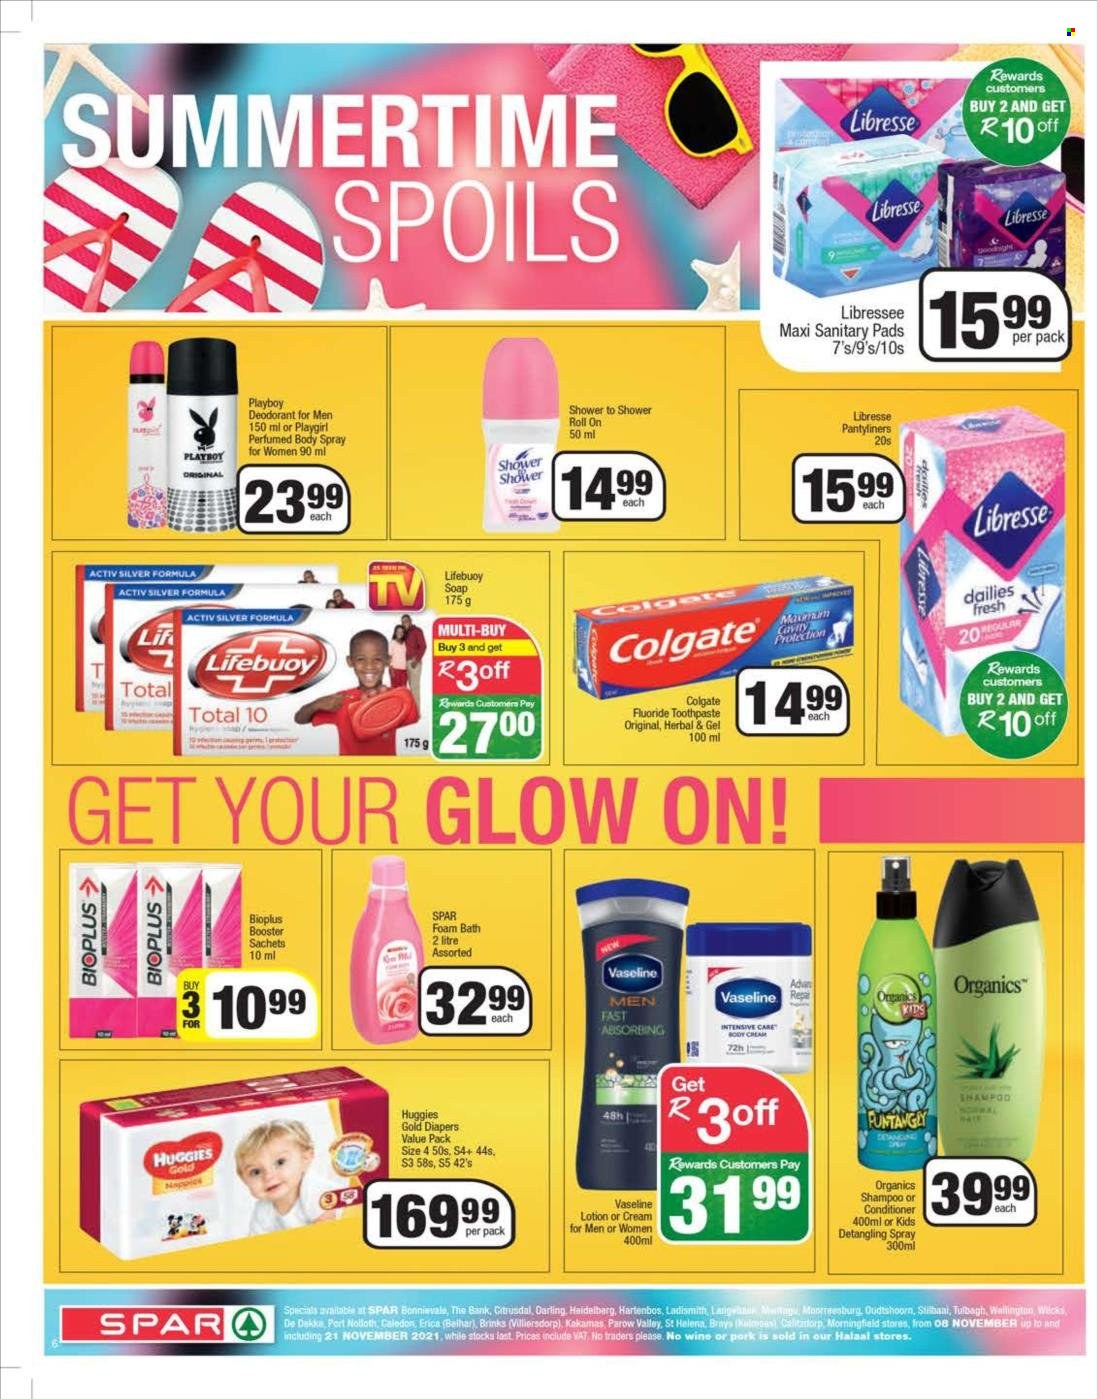 SPAR catalogue  - 08/11/2021 - 21/11/2021 - Sales products - Ladismith, Huggies, nappies, shampoo, bath foam, Vaseline, soap, Lifebuoy, Colgate, toothpaste, sanitary pads, pantyliners, conditioner, body lotion, body spray, anti-perspirant, roll-on, Playboy, deodorant, Playgirl. Page 6.